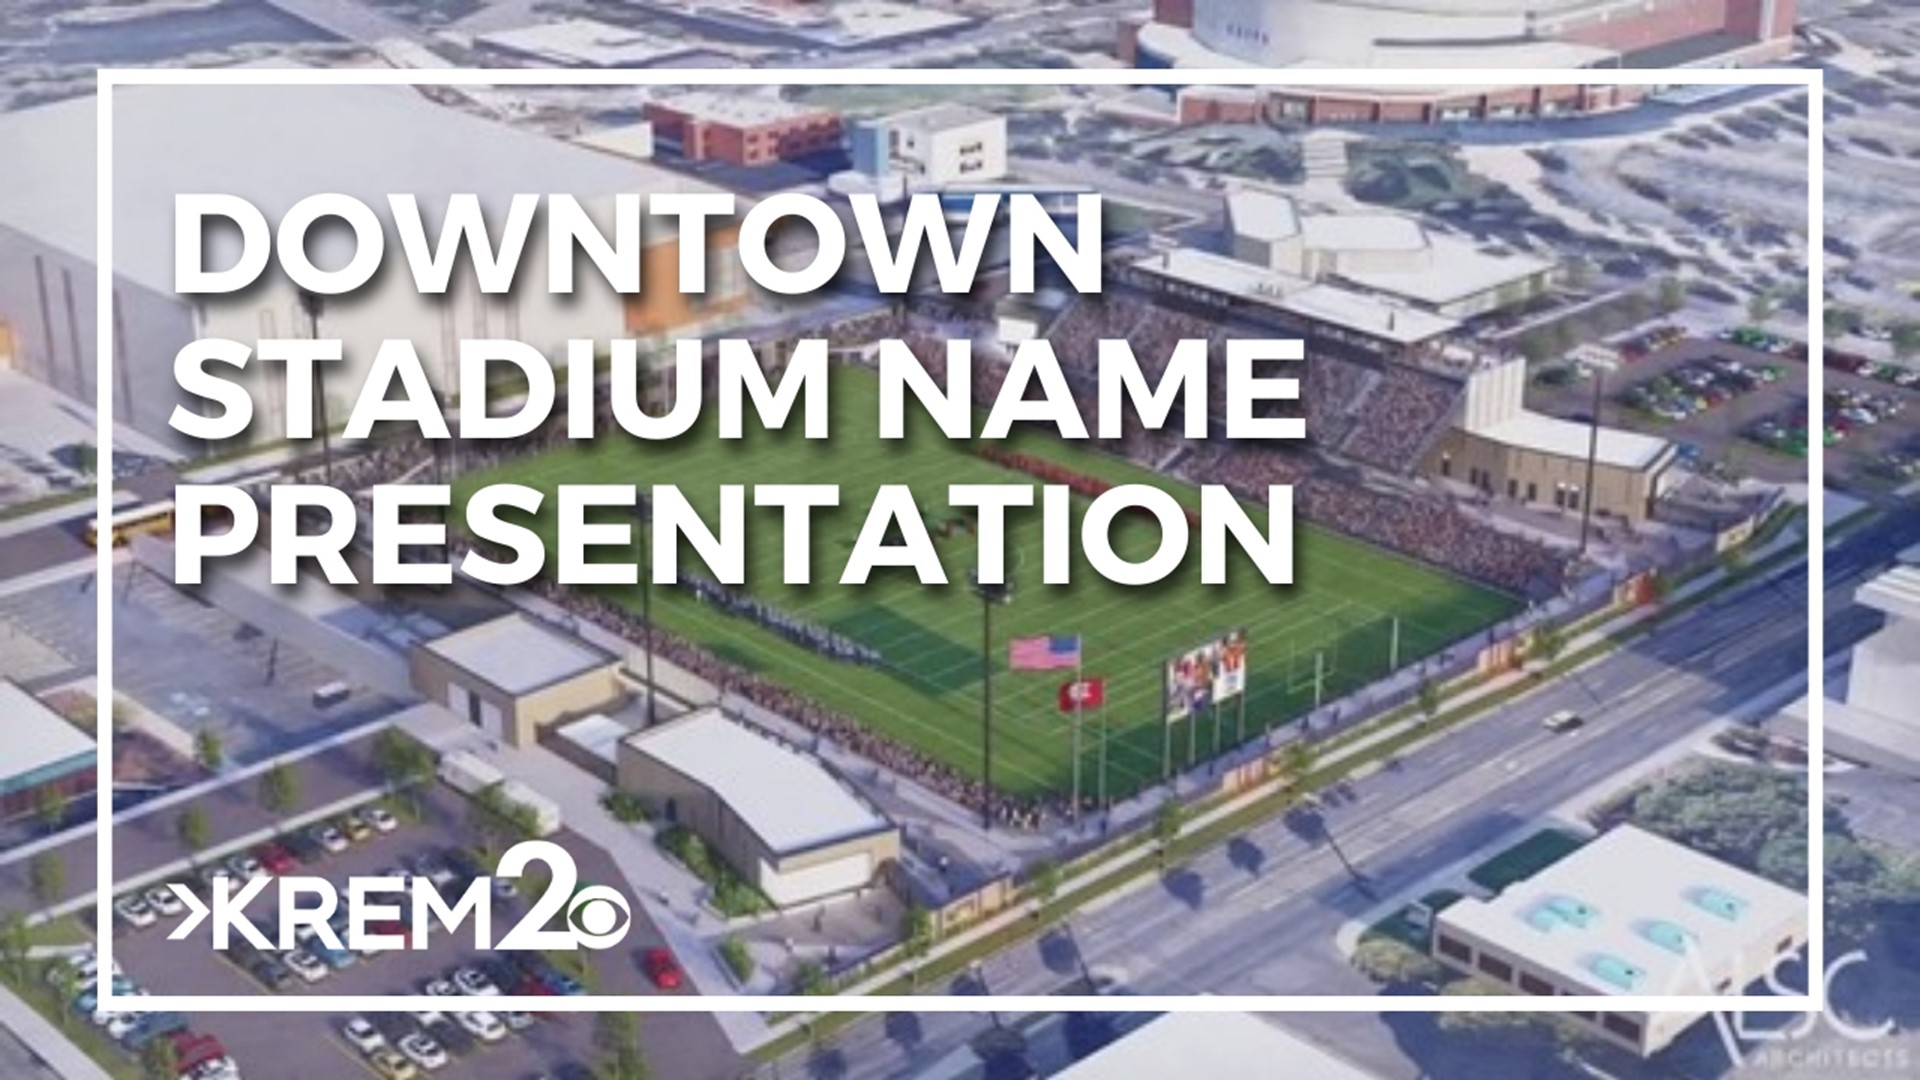 A topping out ceremony for the downtown stadium will take place Thursday morning. The ceremony commemorates the last structural beam lifted into place.